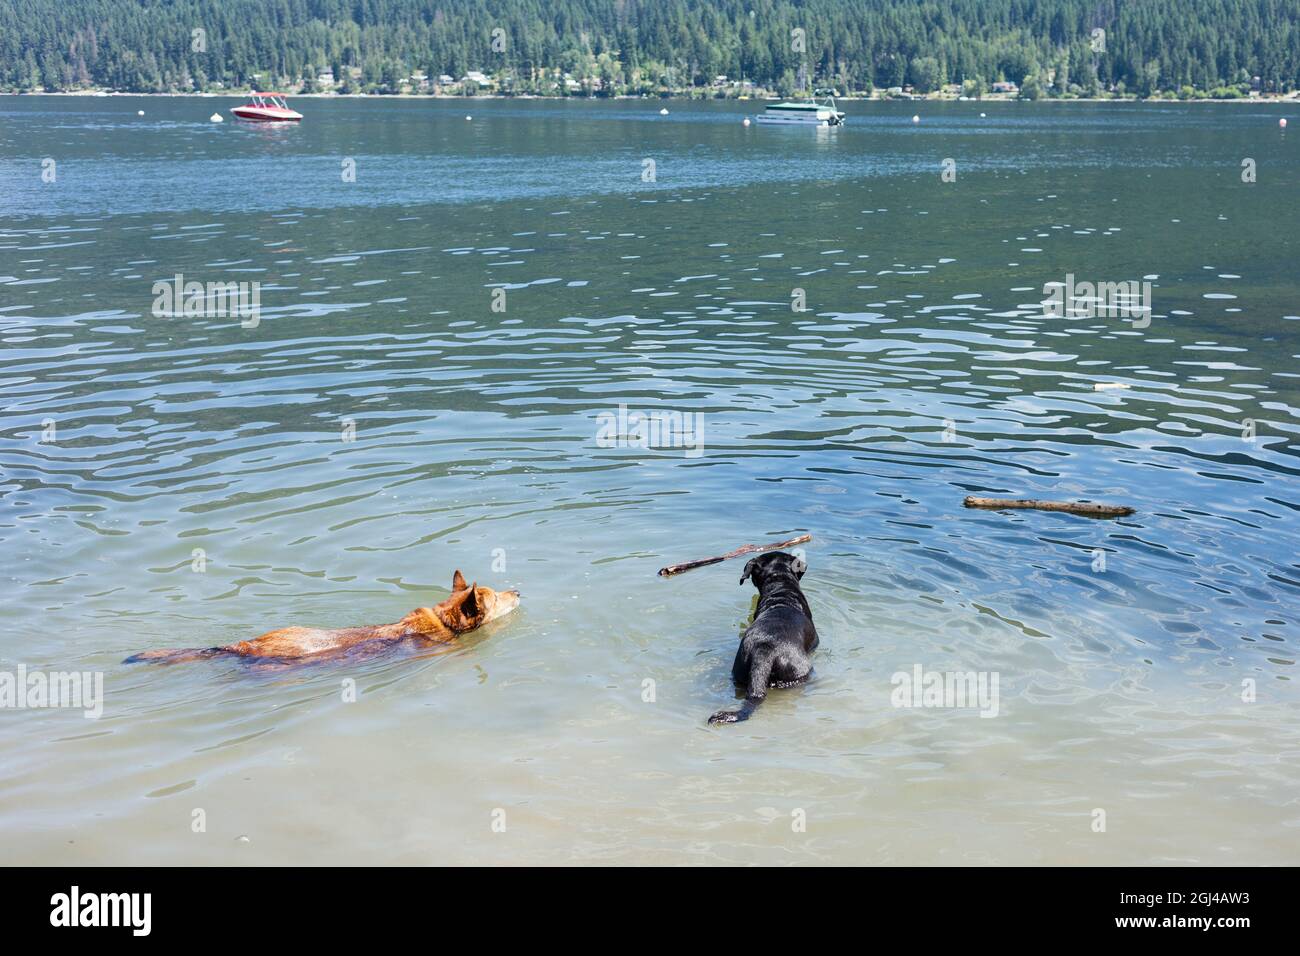 Two big dogs going after sticks in water, Shuswap Lake BC Canada. Stock Photo